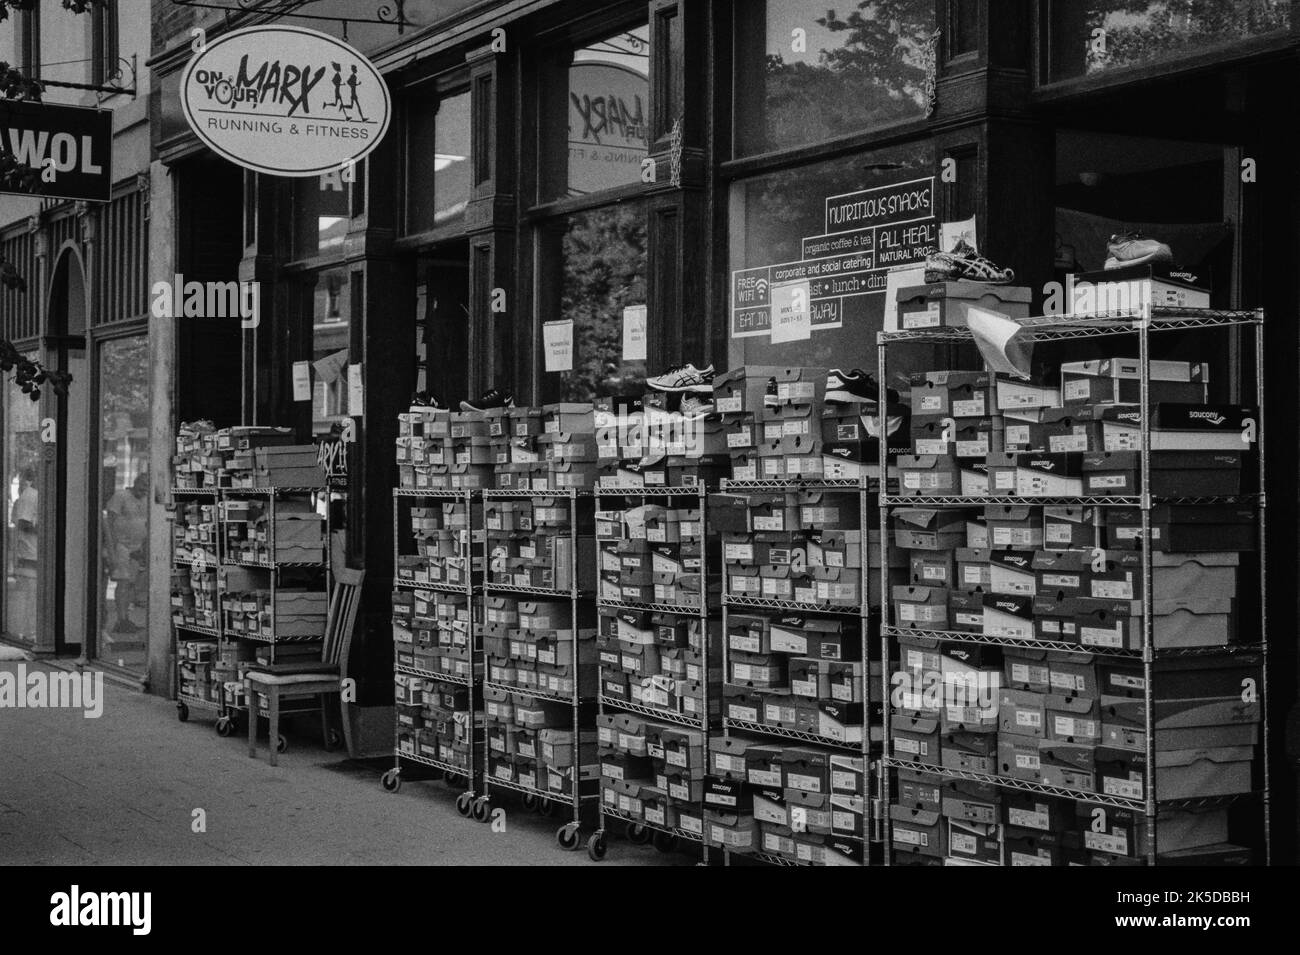 Sneakers stack on rows of shelving ourside a shoe store at the Lowell Folk Festival in historic Lowell, Massachusetts. The image was captured on black Stock Photo